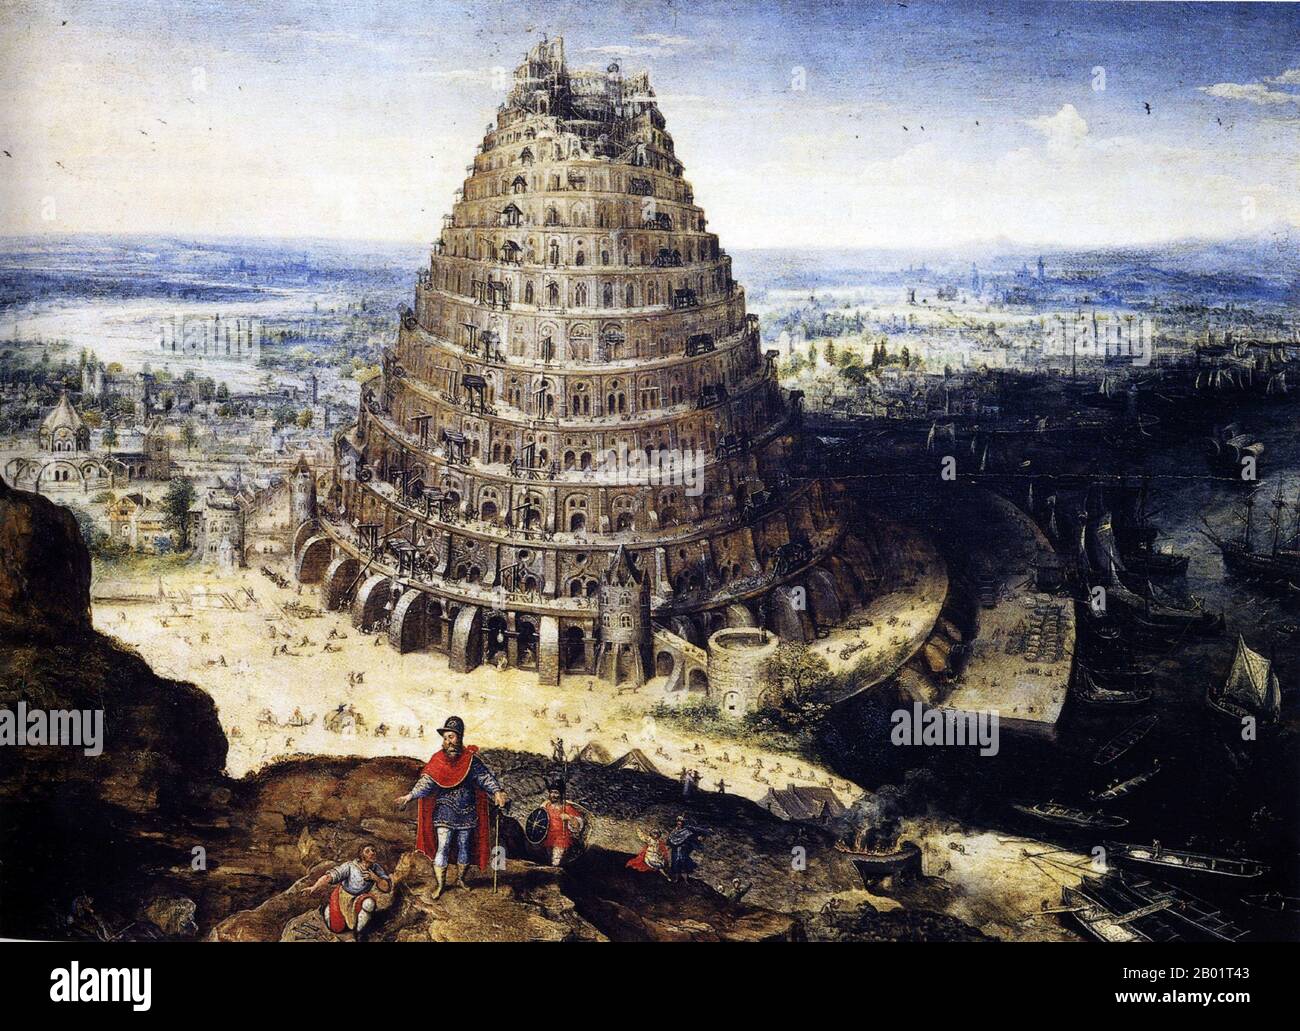 Belgium/Iraq/Mesopotamia: 'The Tower of Babel'. Oil on panel painting by Lucas Van Valckenborch (1535 - 2 February 1597), 1594.  The Tower of Babel, according to the Book of Genesis, was an enormous tower built in the plain of Shinar.  According to the biblical account, a united humanity of the generations following the Great Flood, speaking a single language and migrating from the east, came to the land of Shinar, where they resolved to build a city with a tower 'with its top in the heavens...lest we be scattered abroad upon the face of the Earth'. Stock Photo